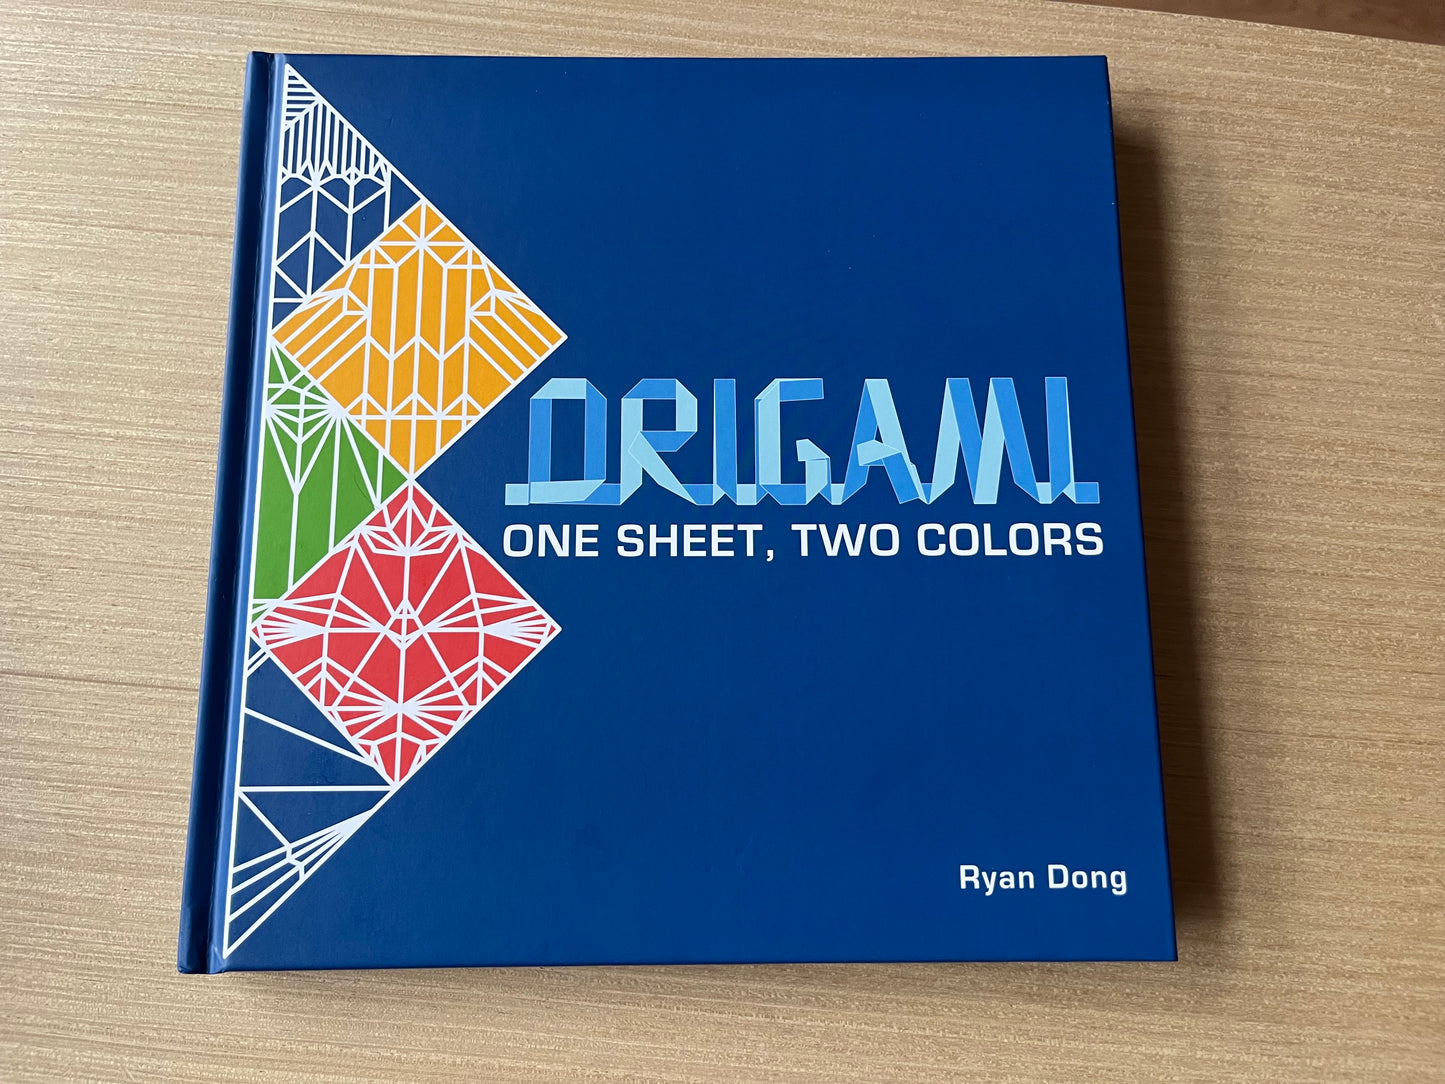 【Hardcover book】One Sheet Two Colors by Ryan Dong